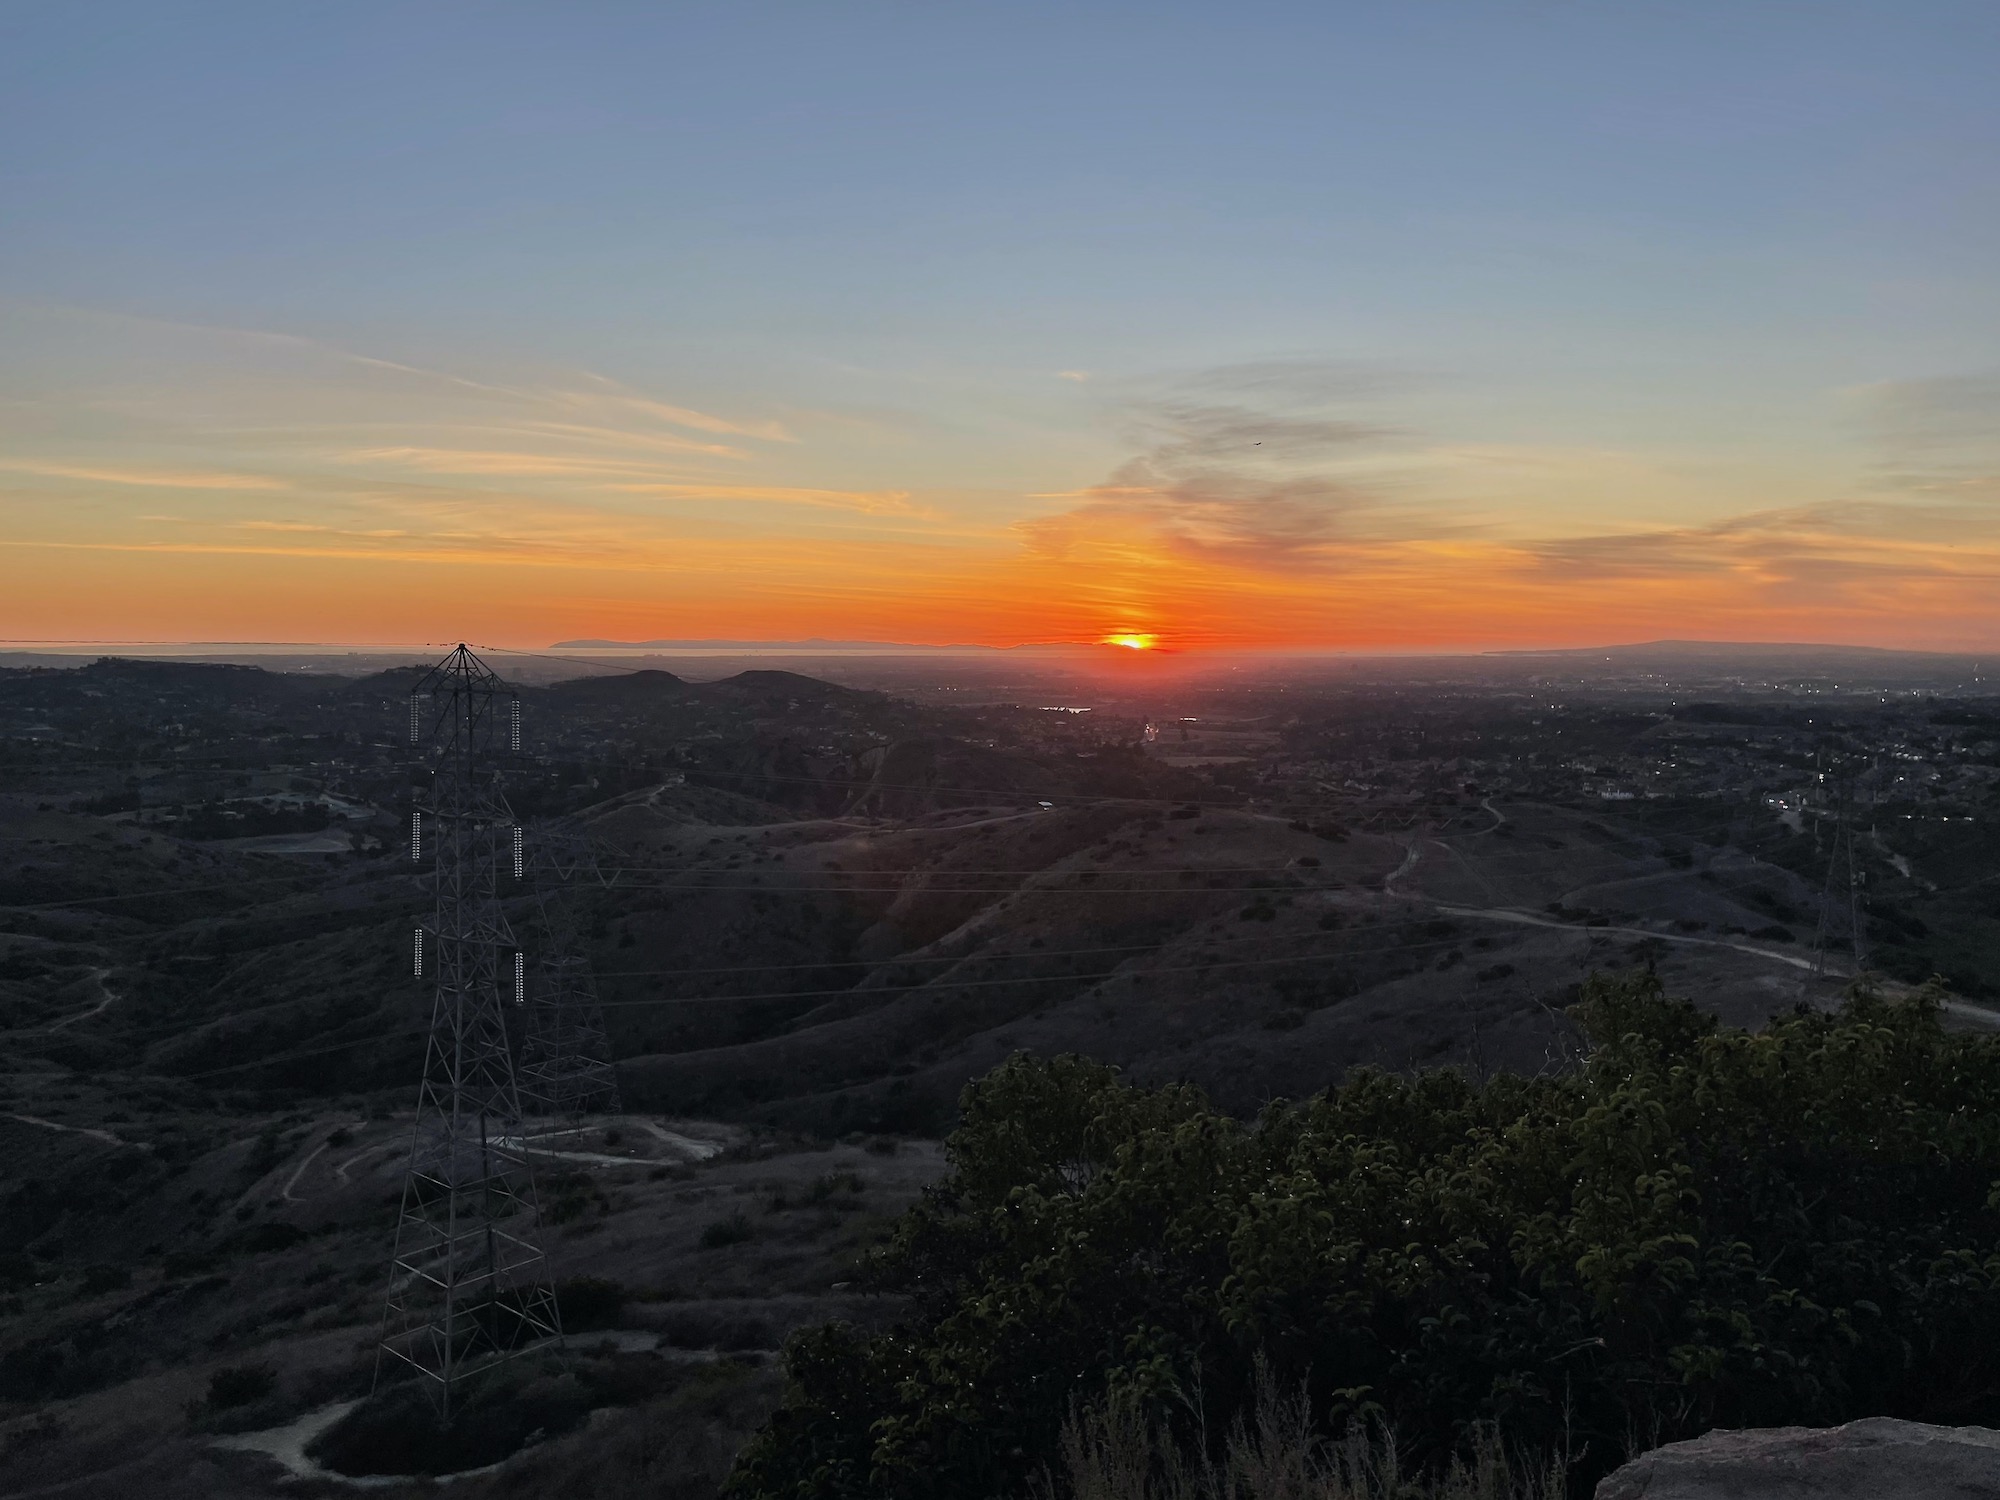 Sunset over pacific ocean - robbers roost vantage point - anaheim hills -6